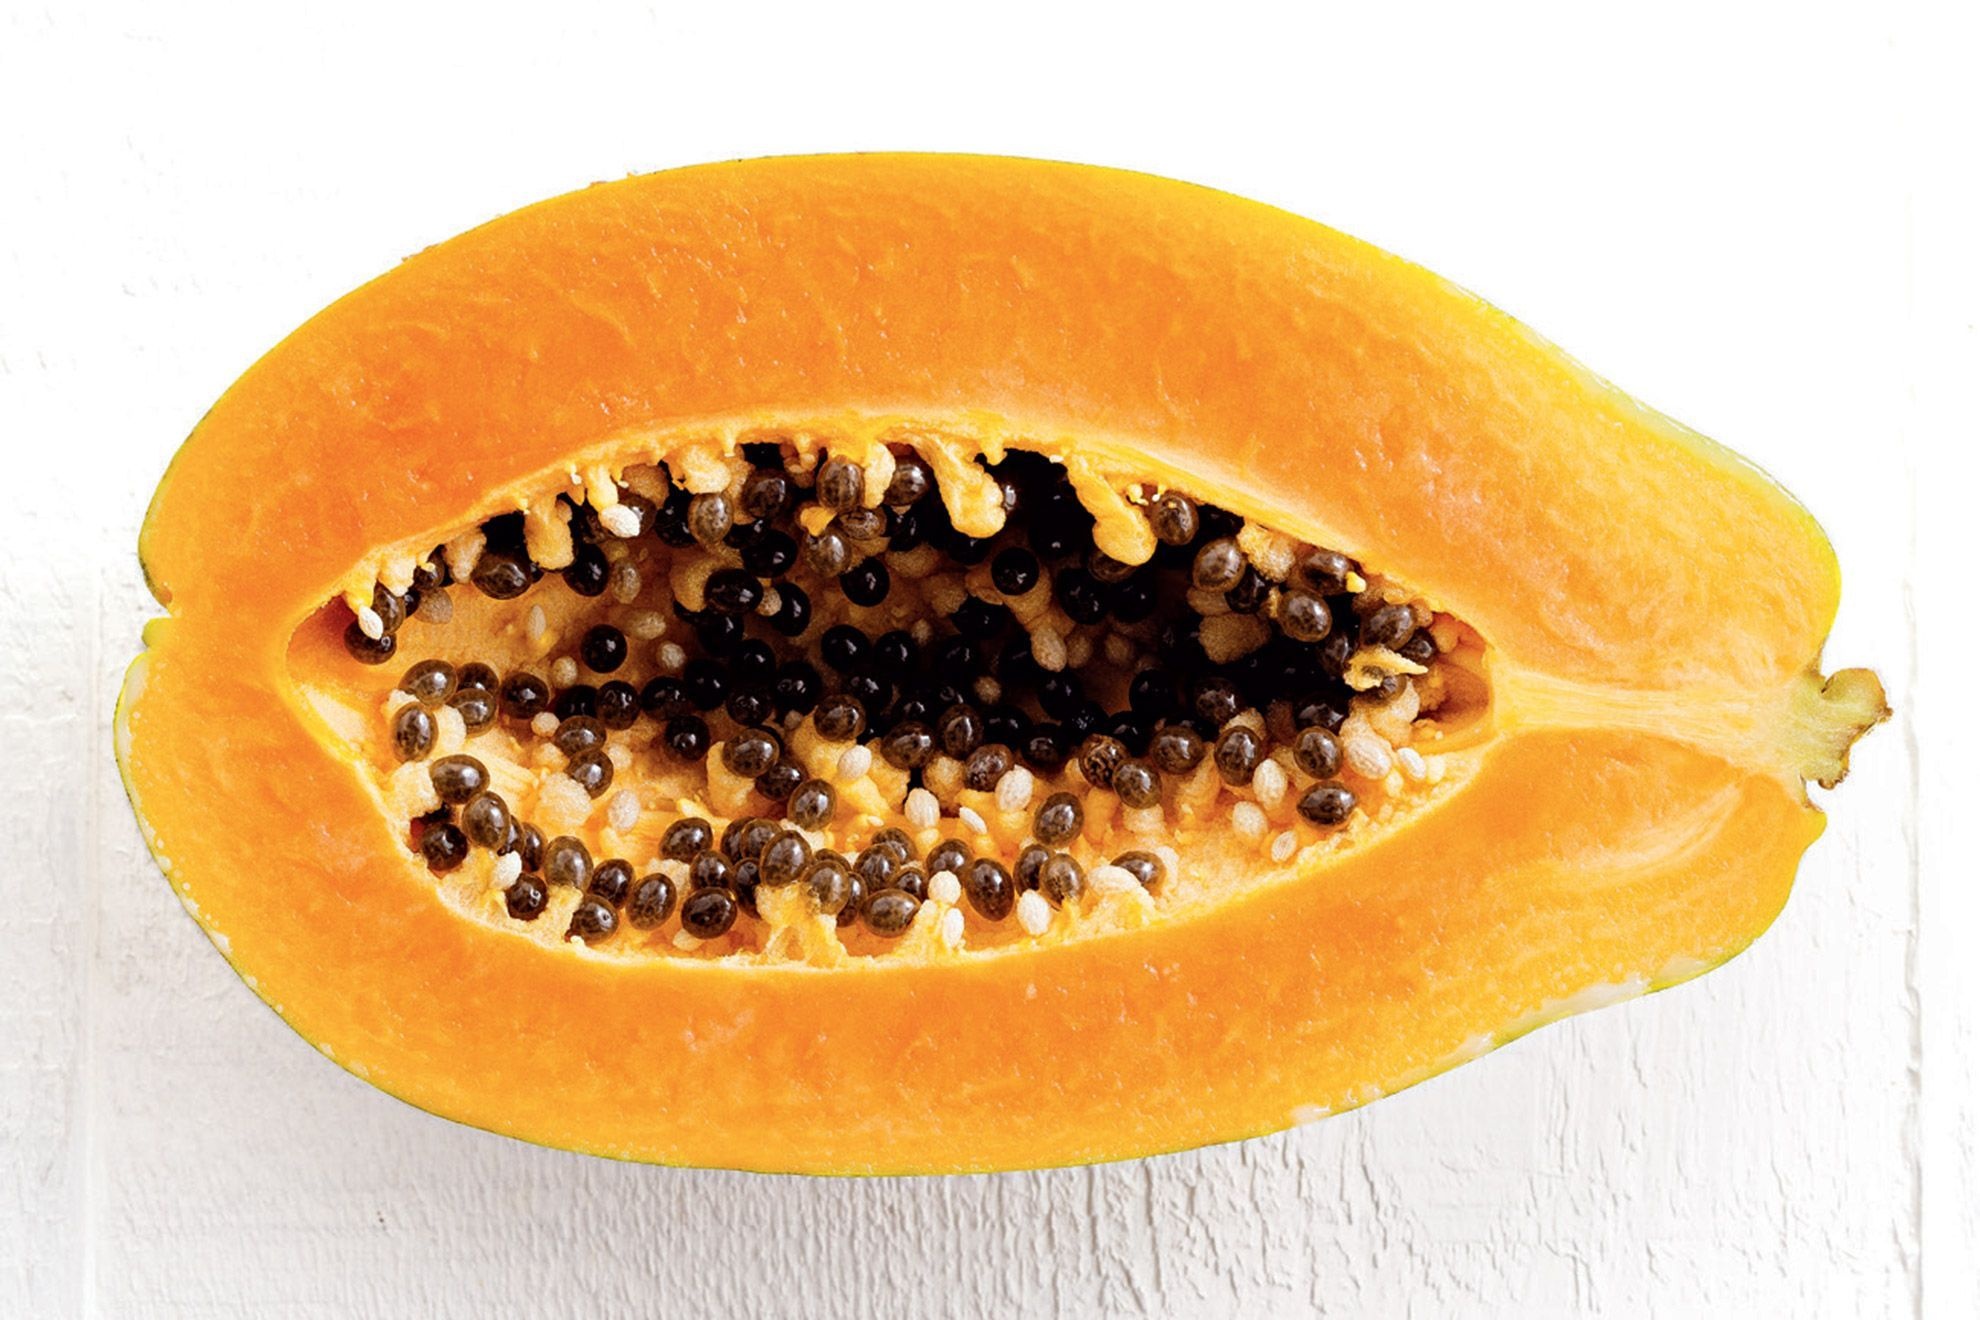 Papaya: A storehouse of various vitamins, minerals, antioxidants, and other healthy nutrients. 1980x1320 HD Wallpaper.